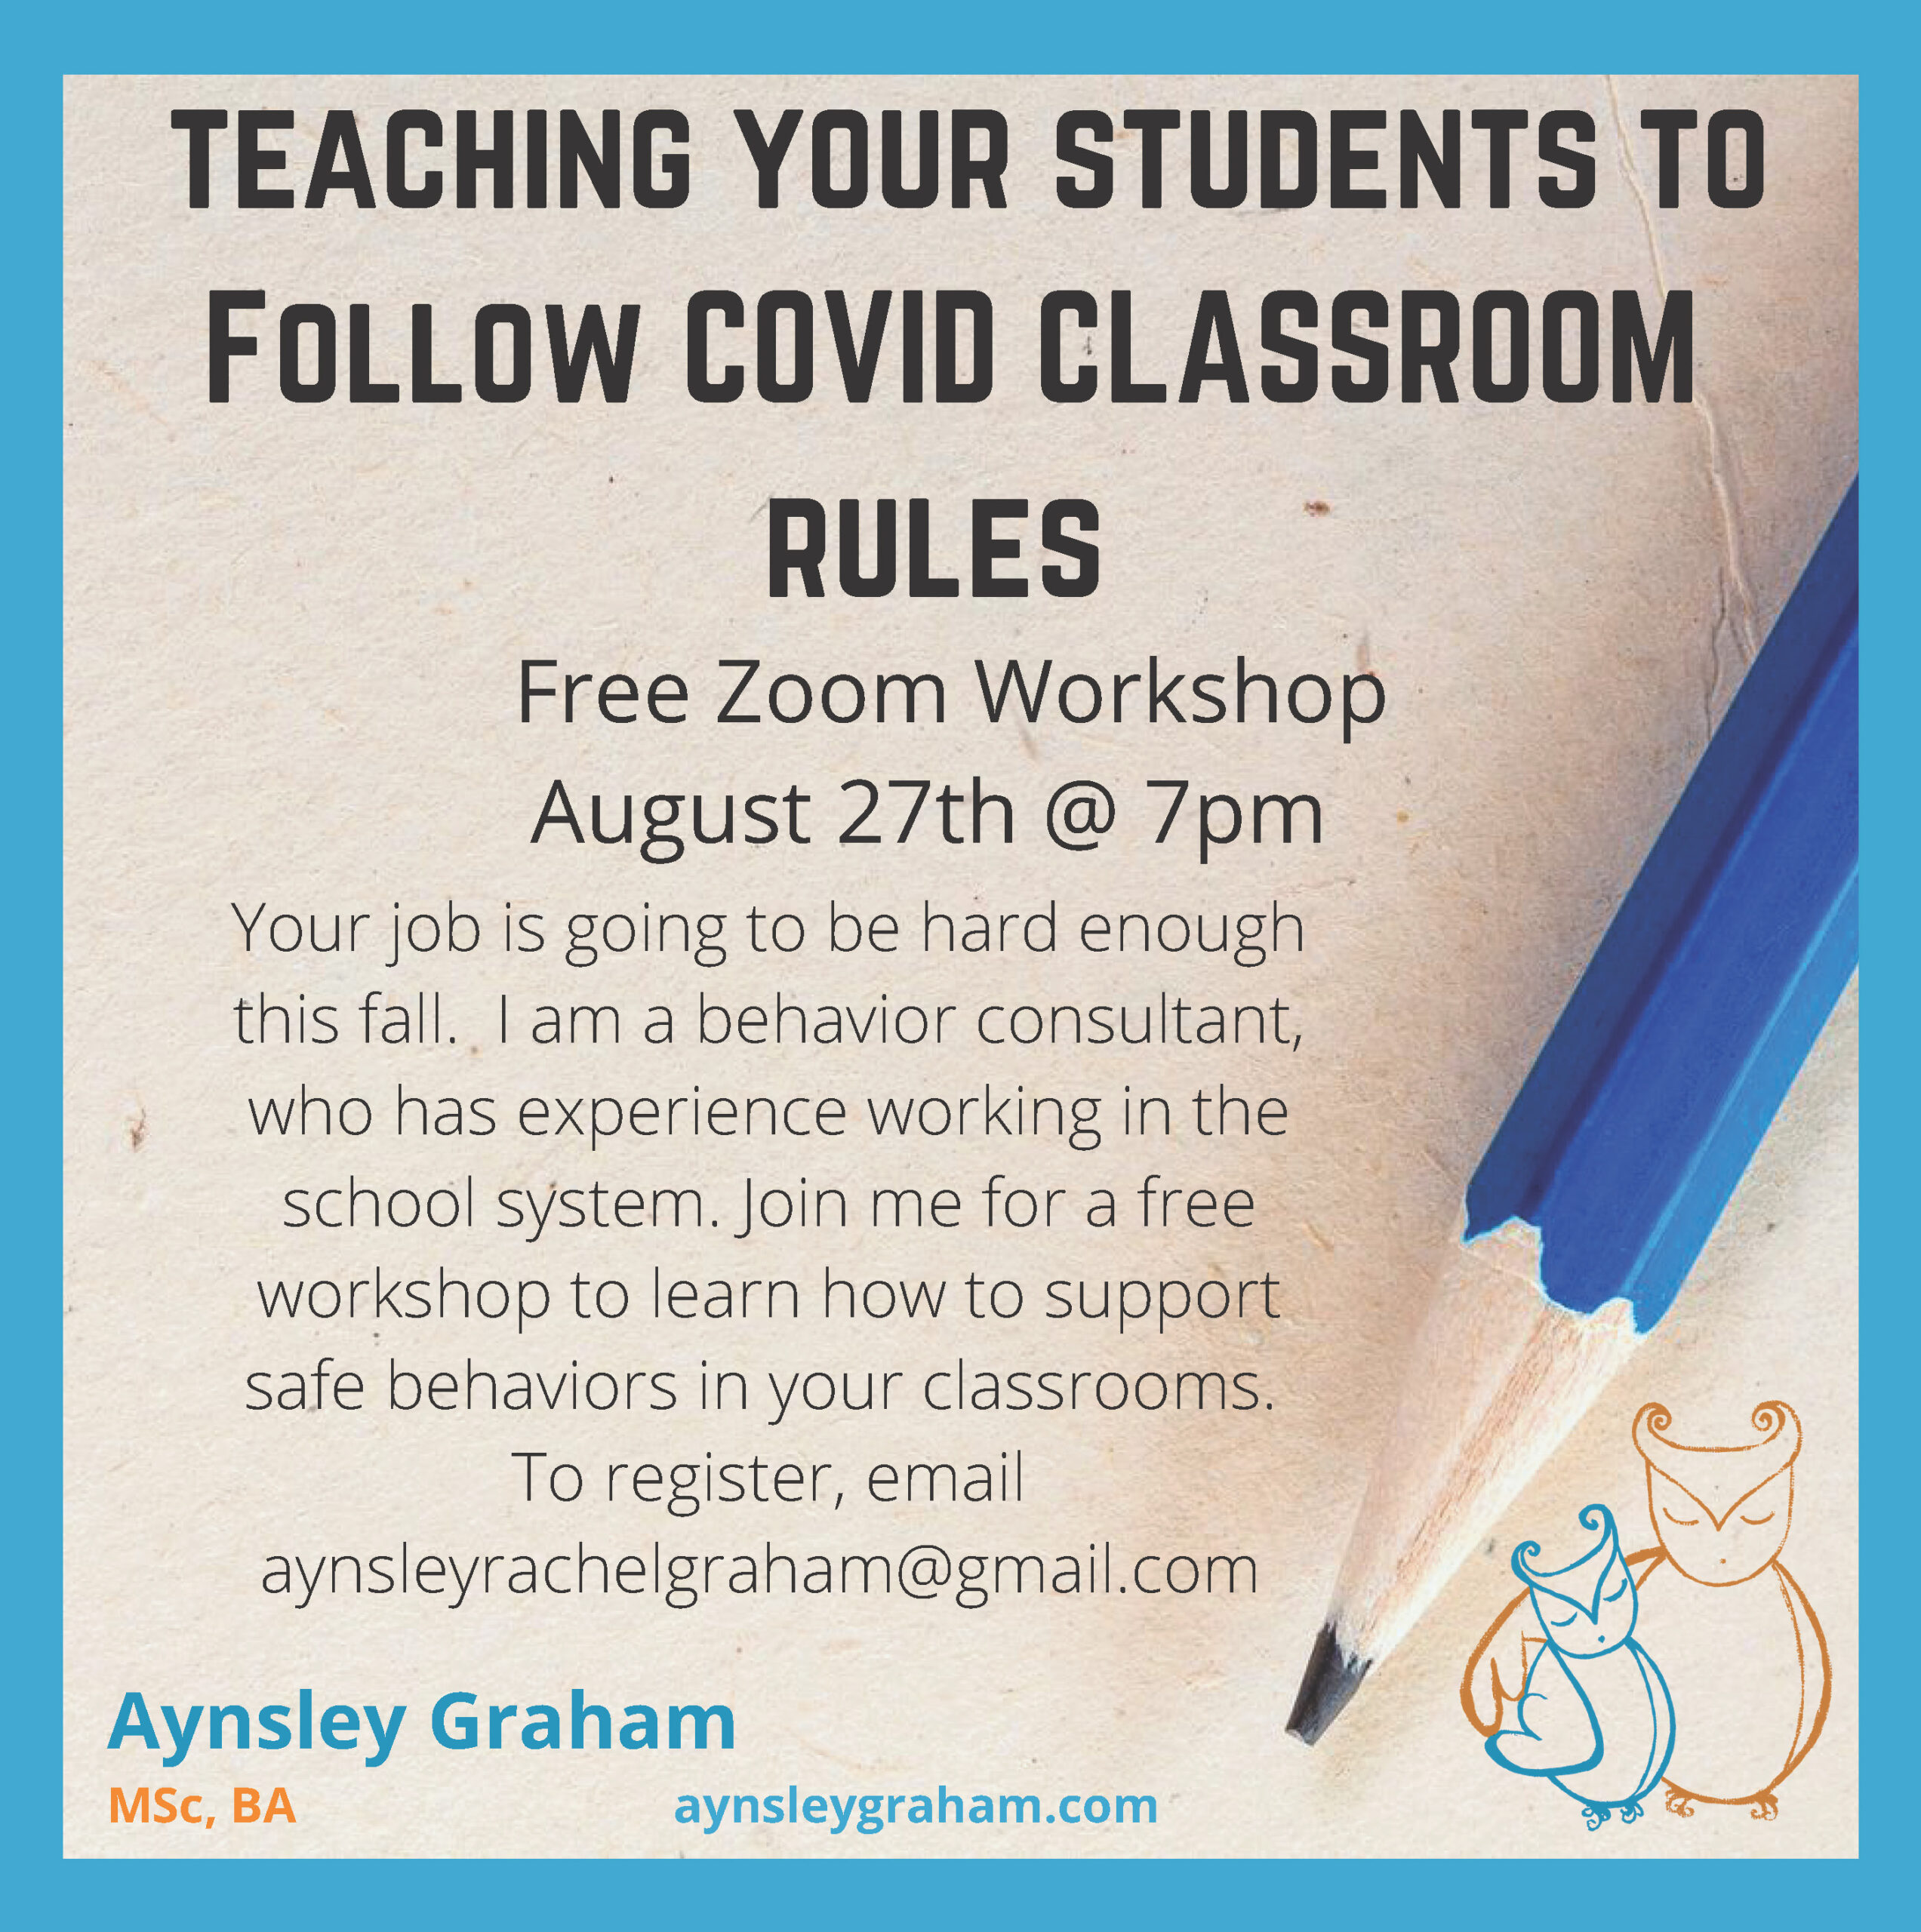 Teaching students to follow covid safety rules